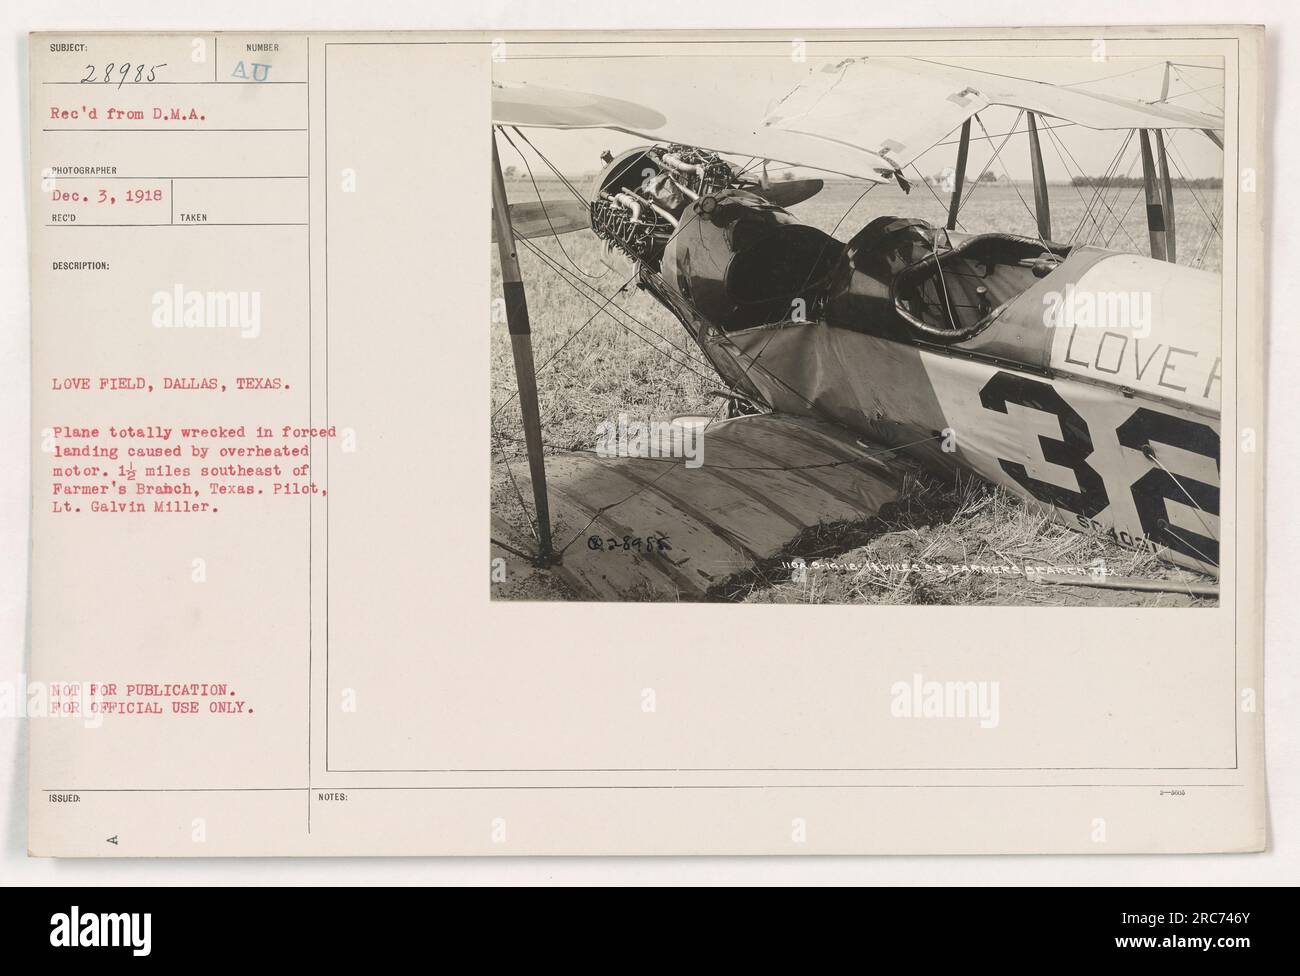 'The image shows a plane that has been entirely wrecked due to a forced landing caused by an overheated motor. The incident took place approximately 1 mile southeast of Farmer's Branch, Texas. The pilot involved was Lt. Galvin Miller. This photograph was taken at Love Field in Dallas, Texas.' Stock Photo